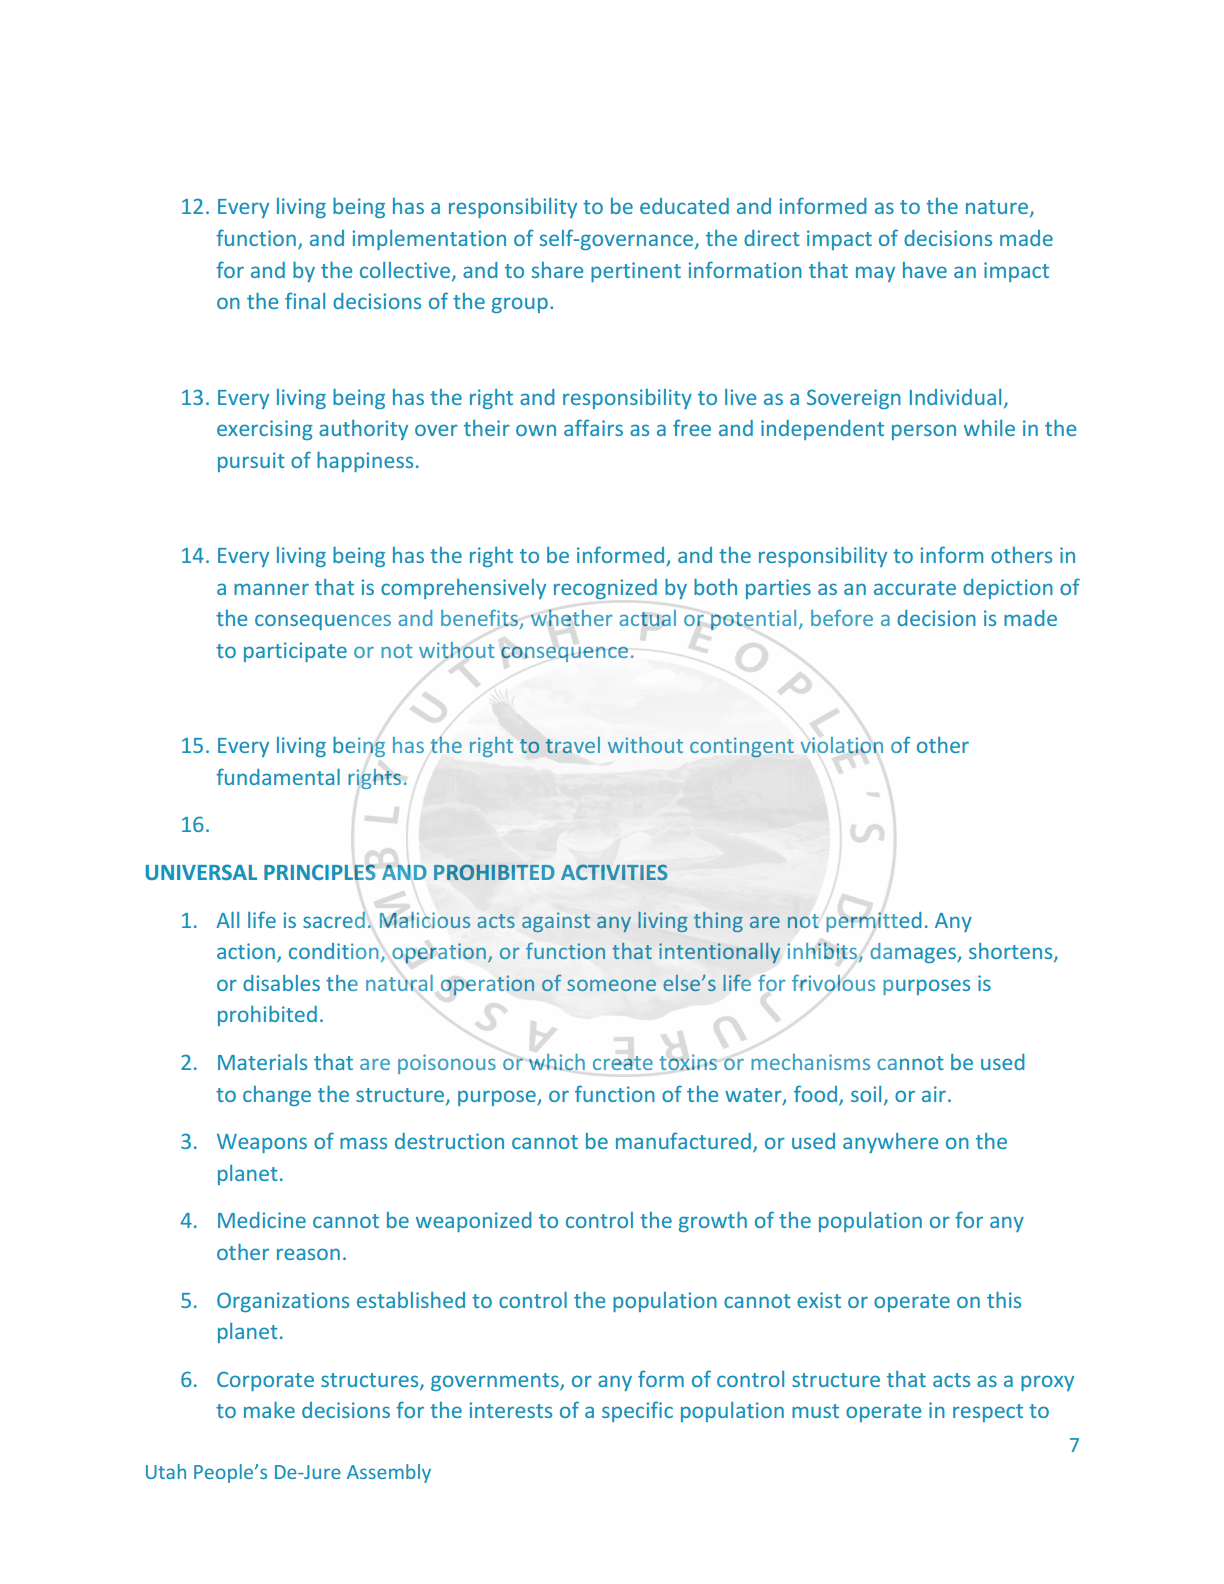 New Declaration of Independencepng_Page7